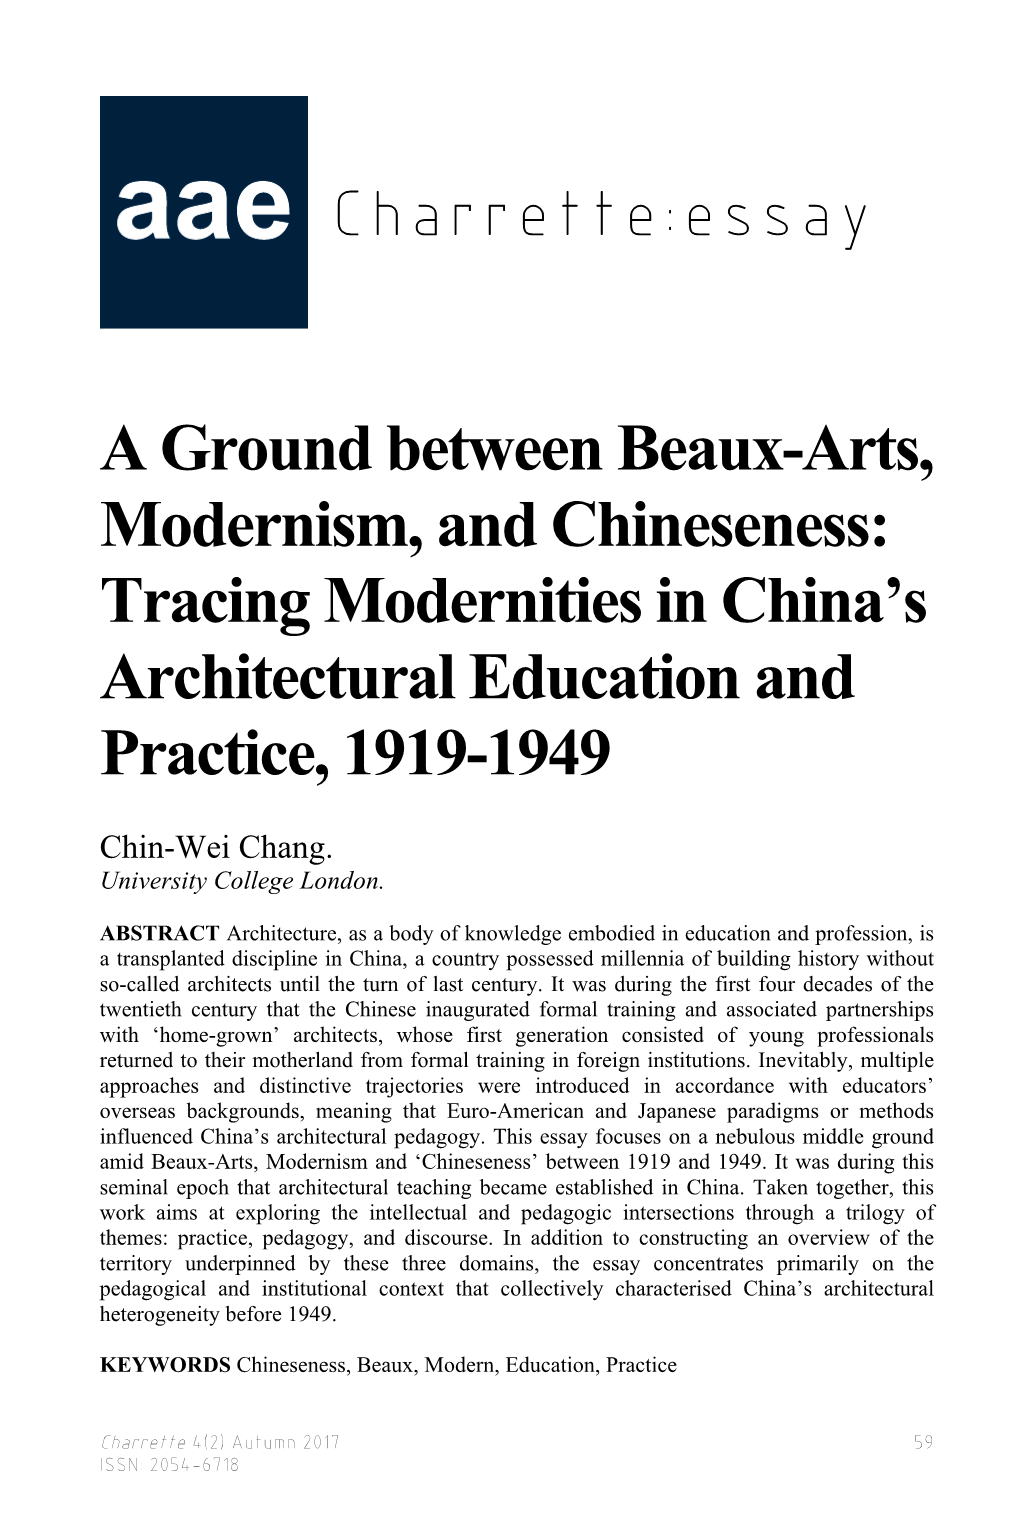 A Ground Between Beaux-Arts, Modernism, and Chineseness: Tracing Modernities in China’S Architectural Education and Practice, 1919-1949